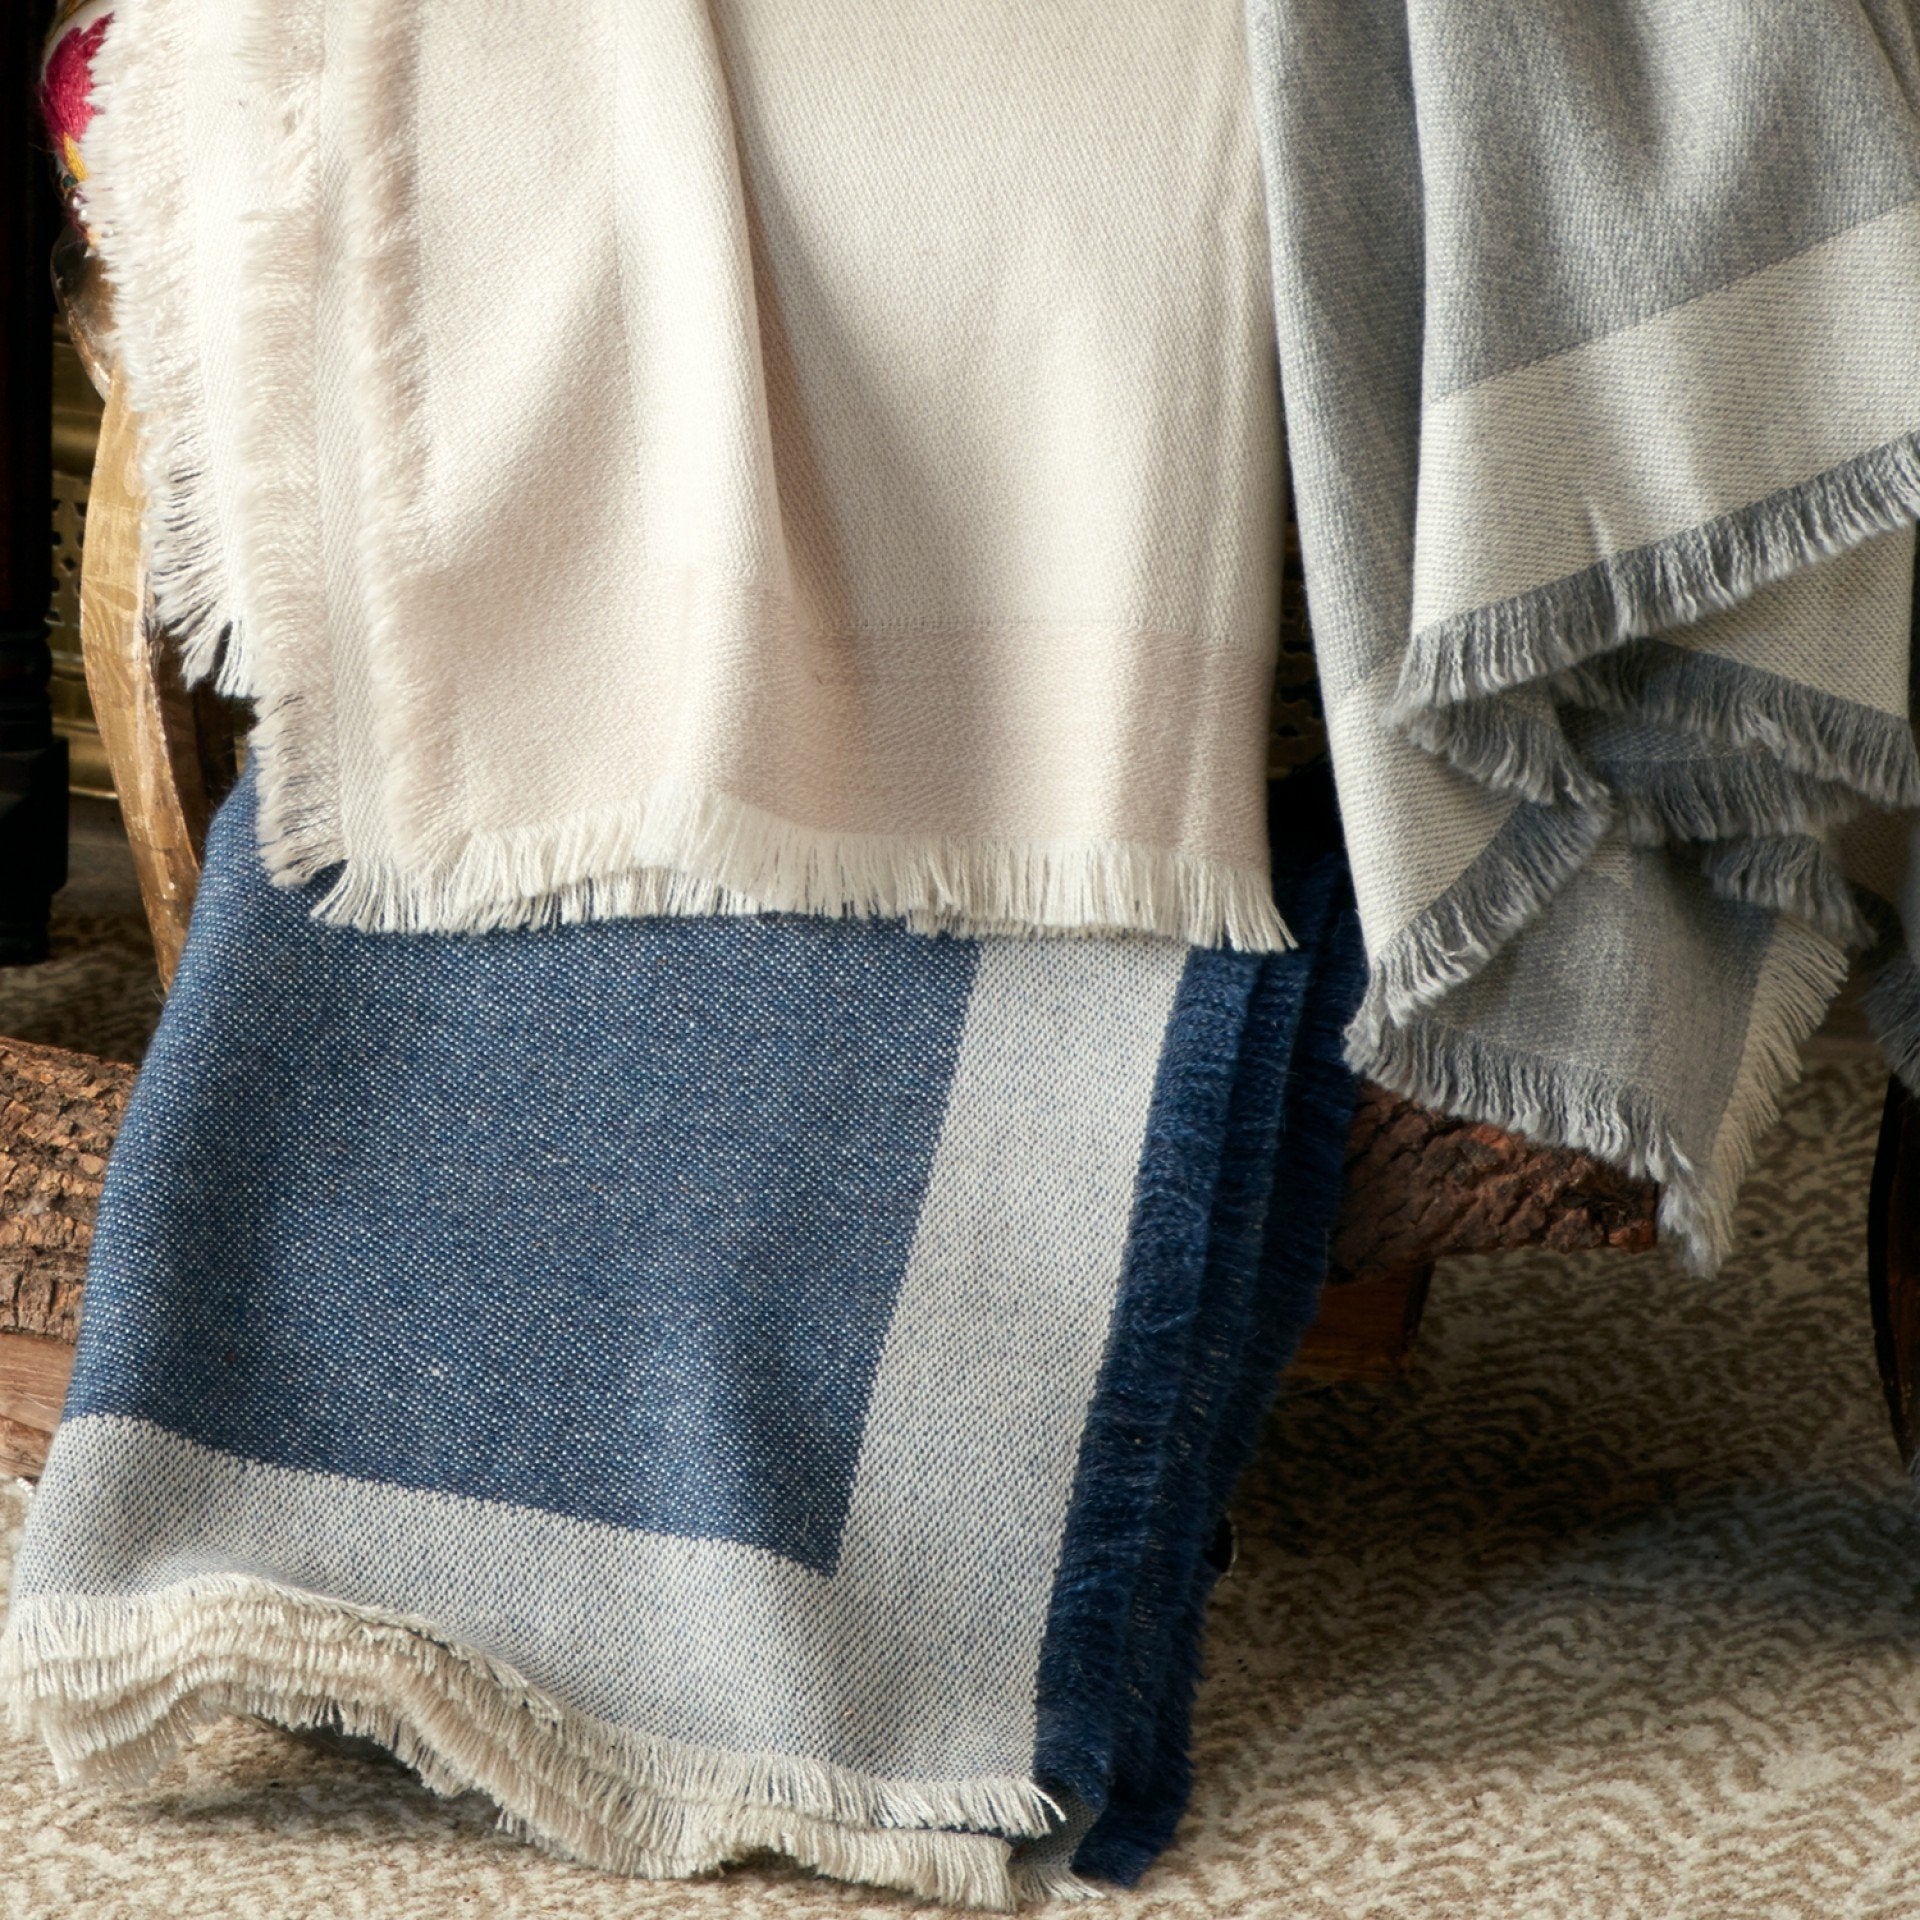 Suri Alpaca Throw Blanket by Matouk | Fig Linens and Home - FIG LINENS ...